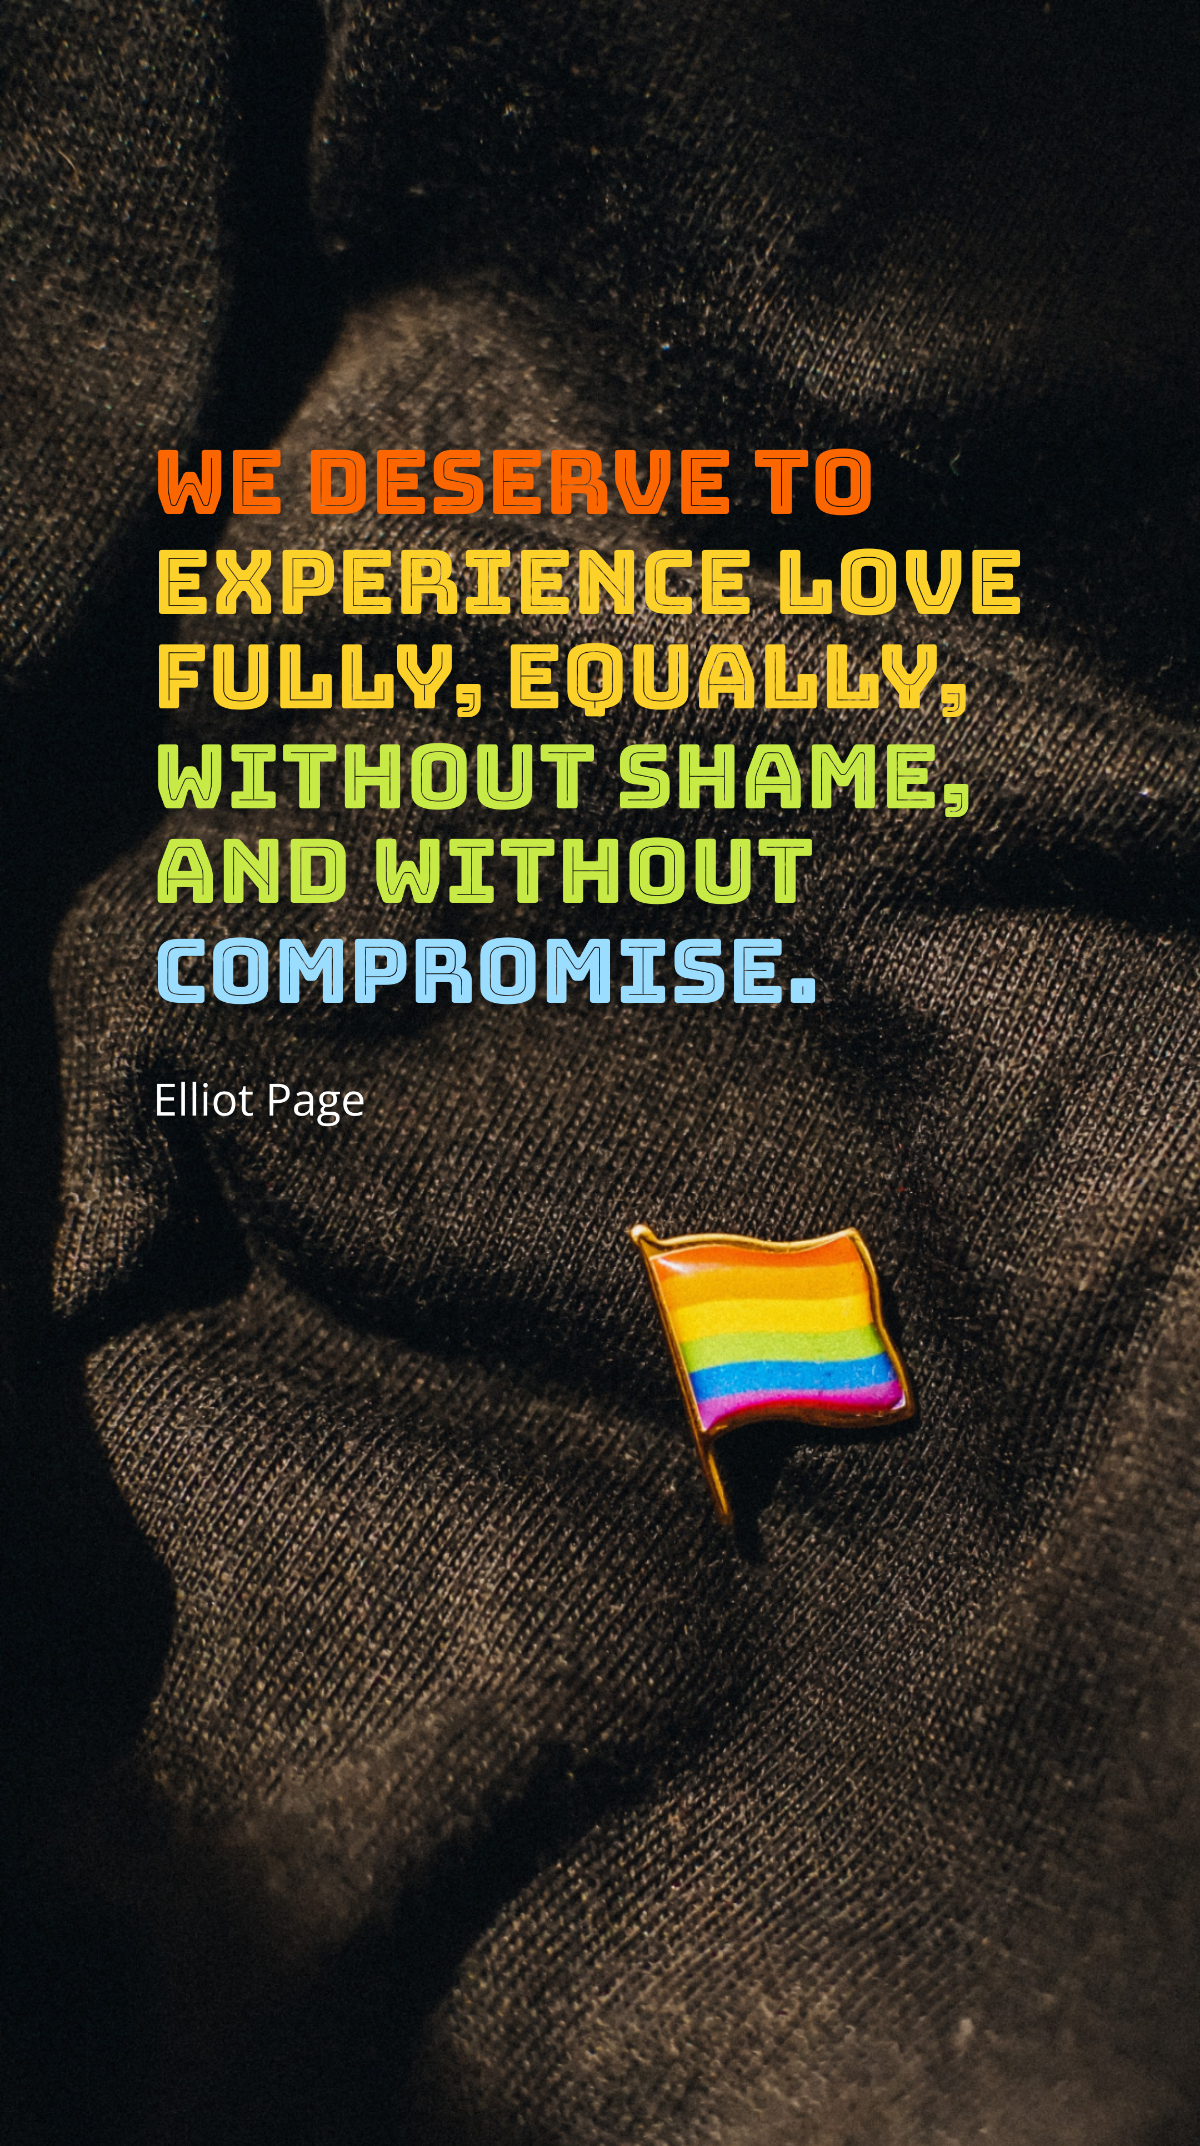 Elliot Page - We deserve to experience love fully, equally, without shame, and without compromise. Template